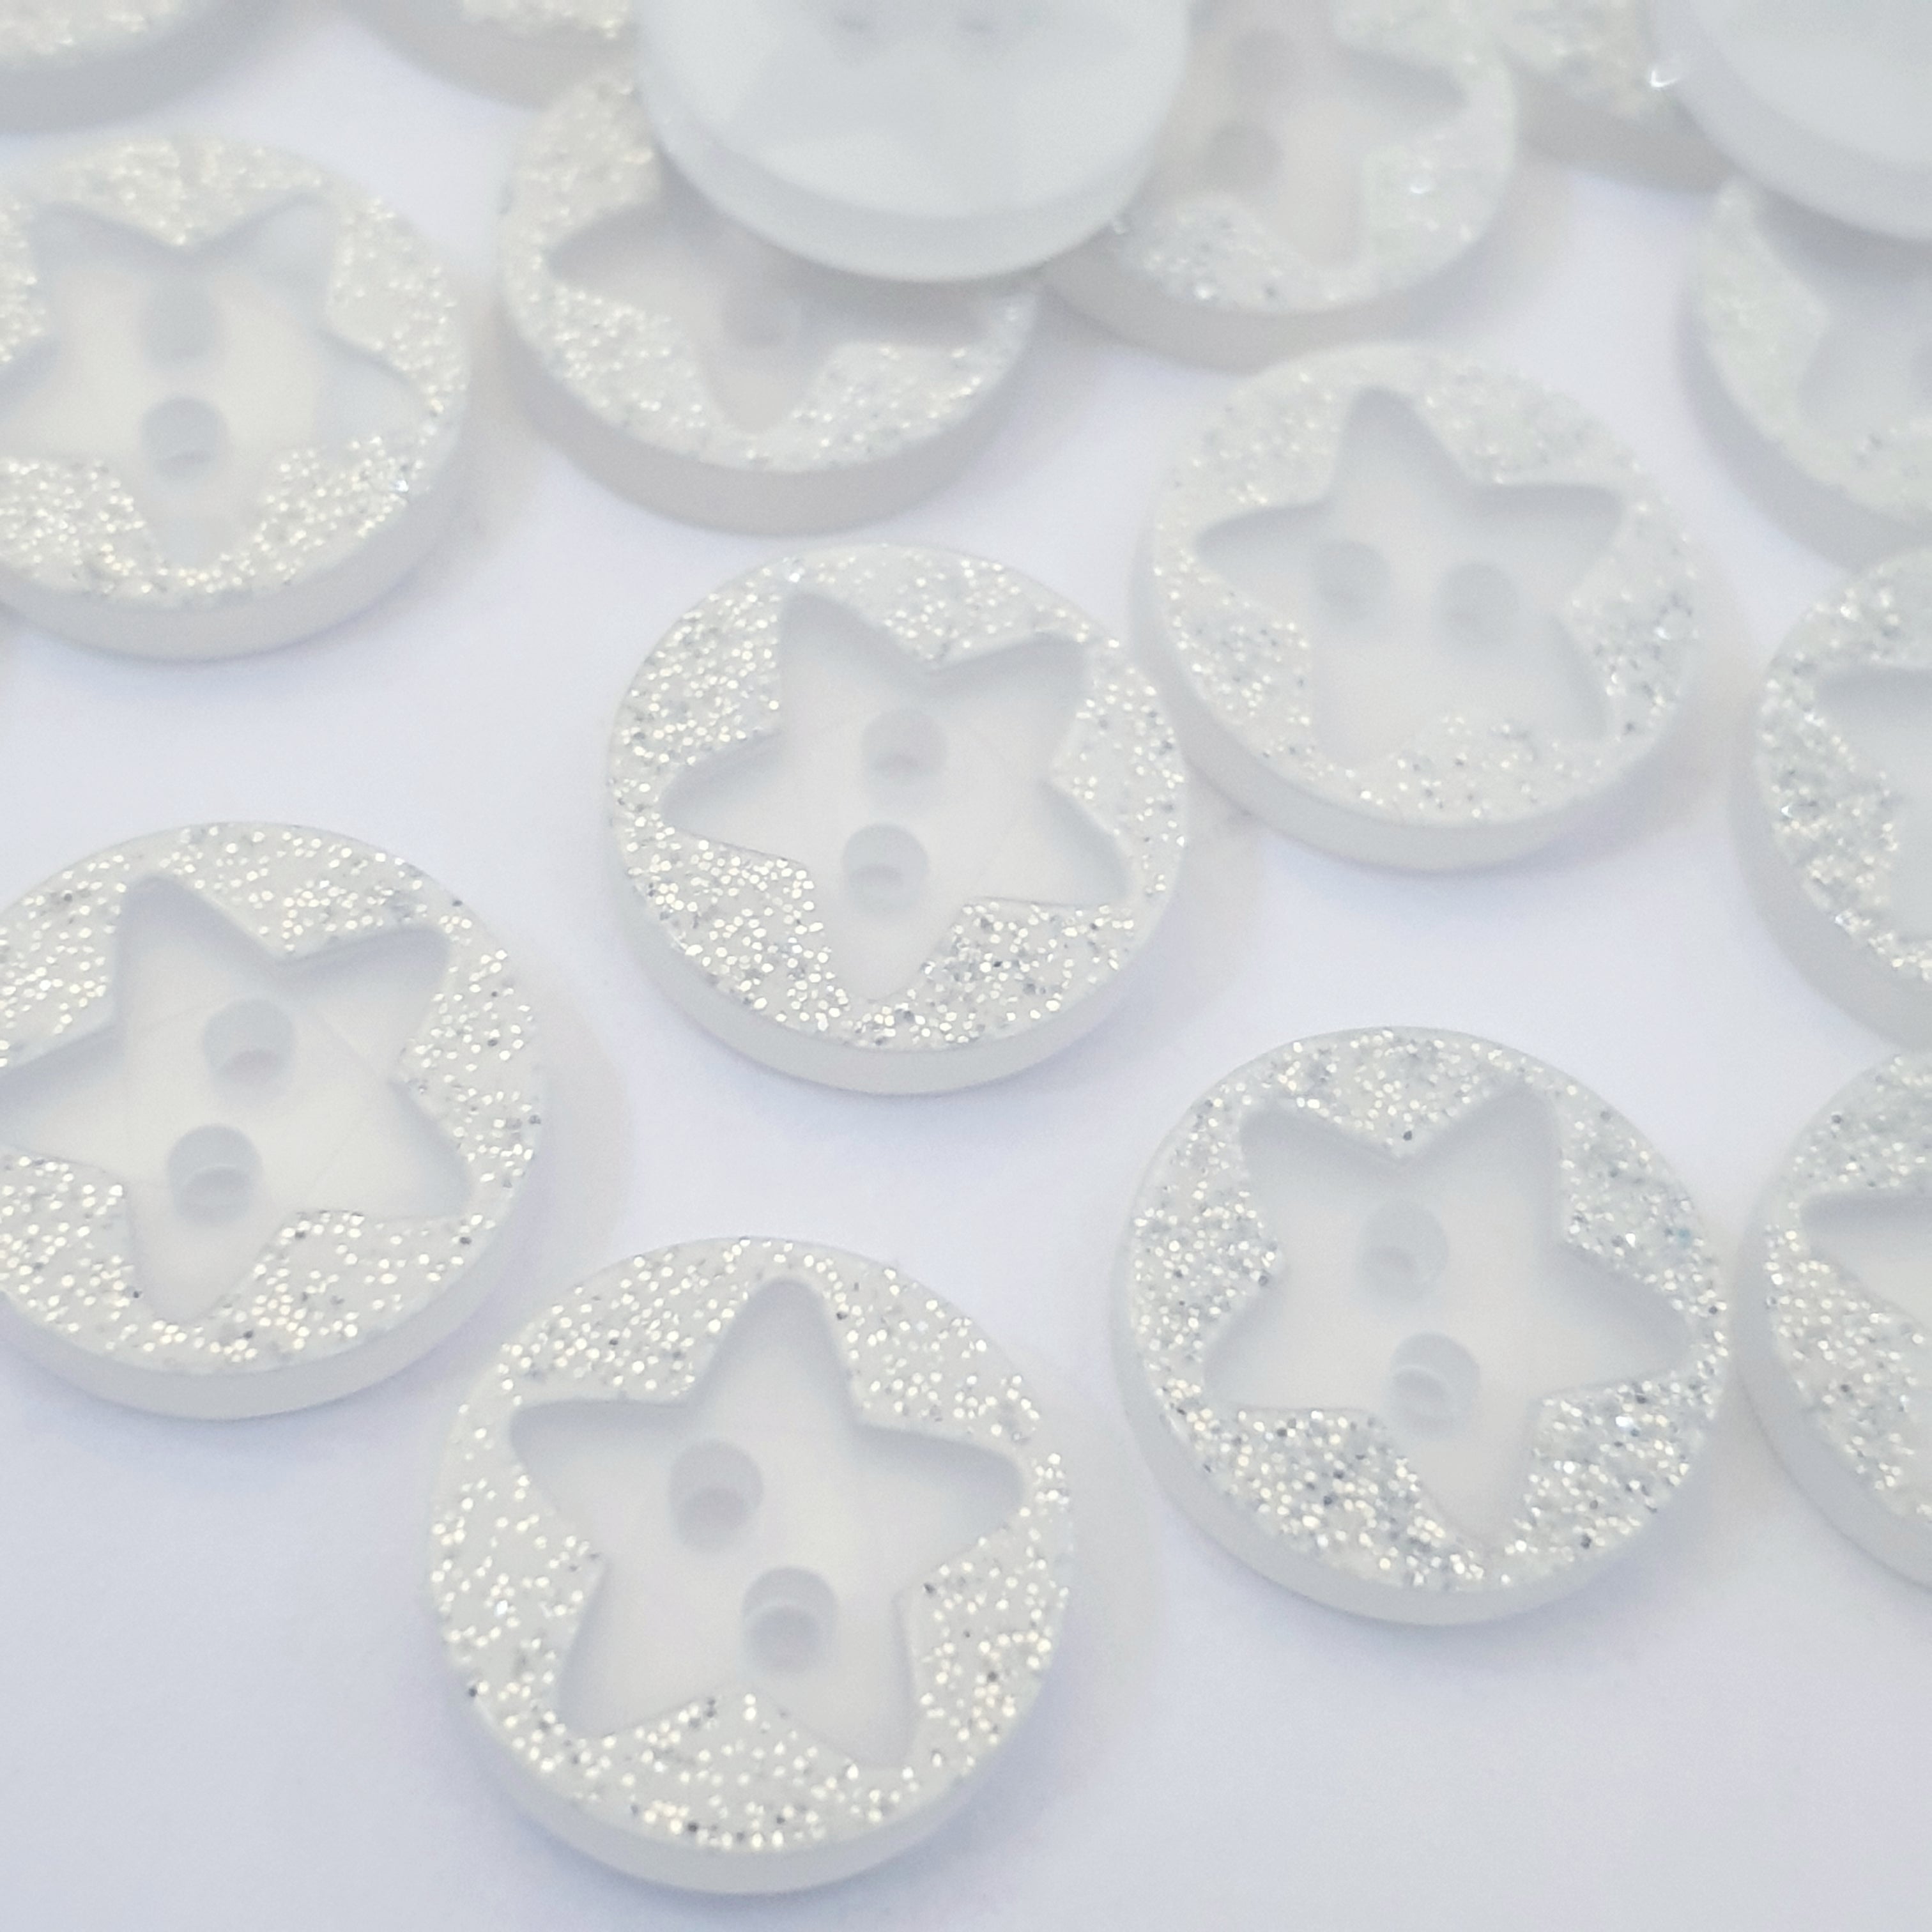 MajorCrafts 40pcs 12.5mm White Glittered 'Star Engraved' 2 Holes Round Sewing Resin Buttons